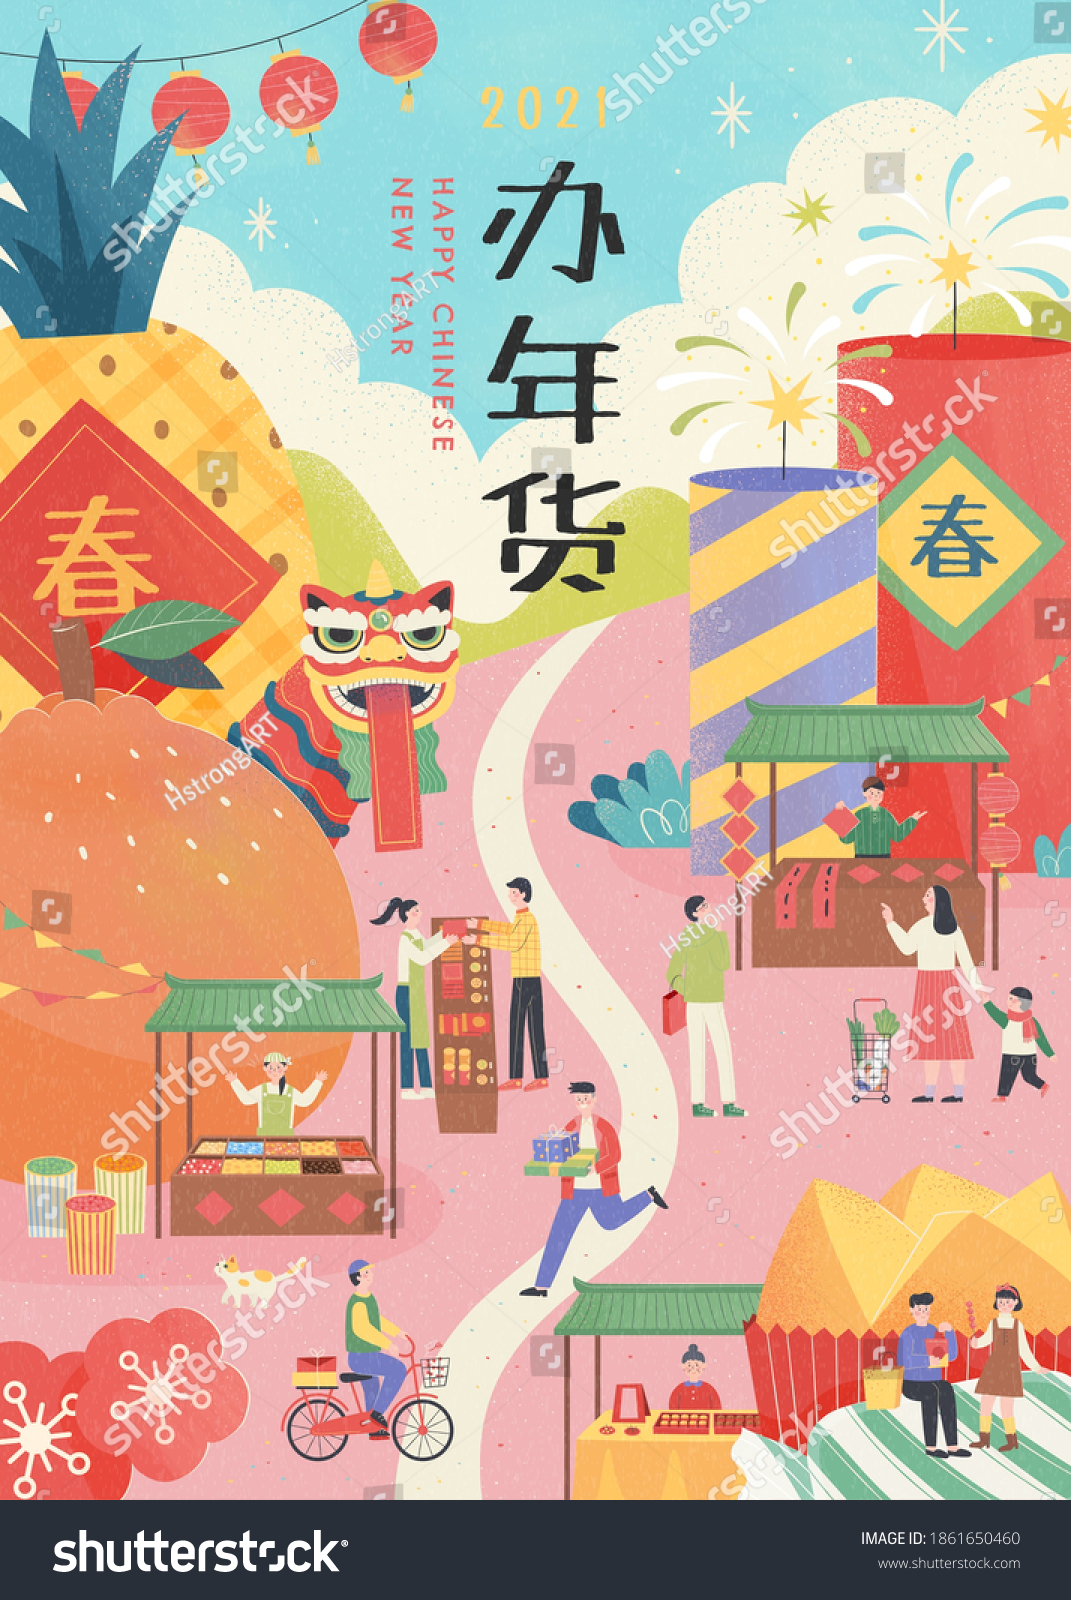 Miniature Asian people buying food and gifts in outdoor market, illustration in pastel color design, TEXT: 2021 Lunar new year shopping #1861650460